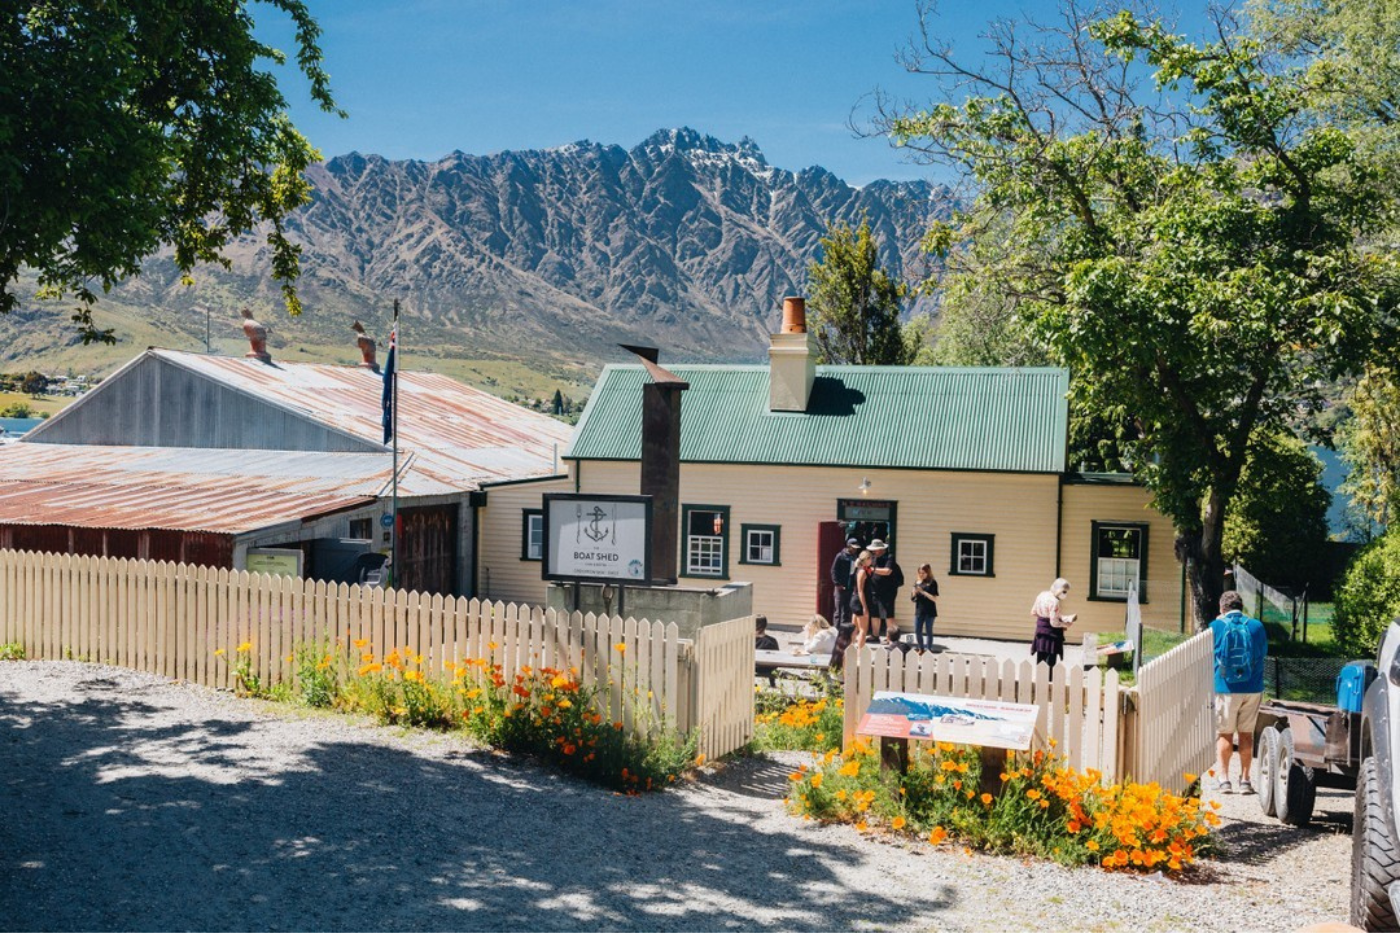 Exterior of the Boat Shed Cafe with mountain in background